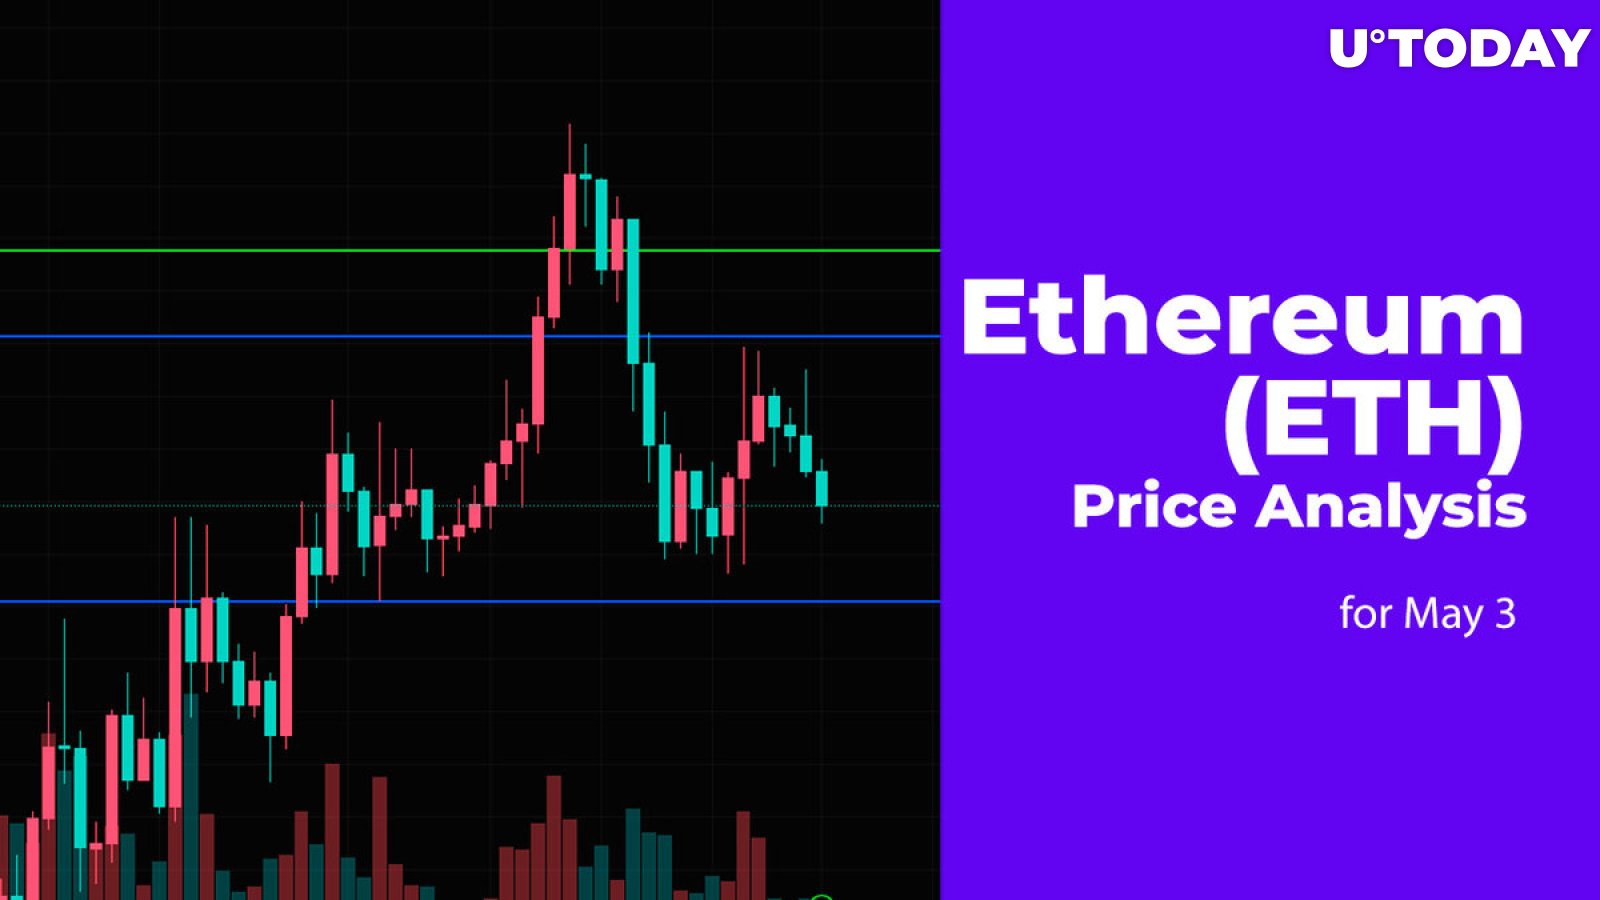 Ethereum (ETH) Price Analysis for May 3